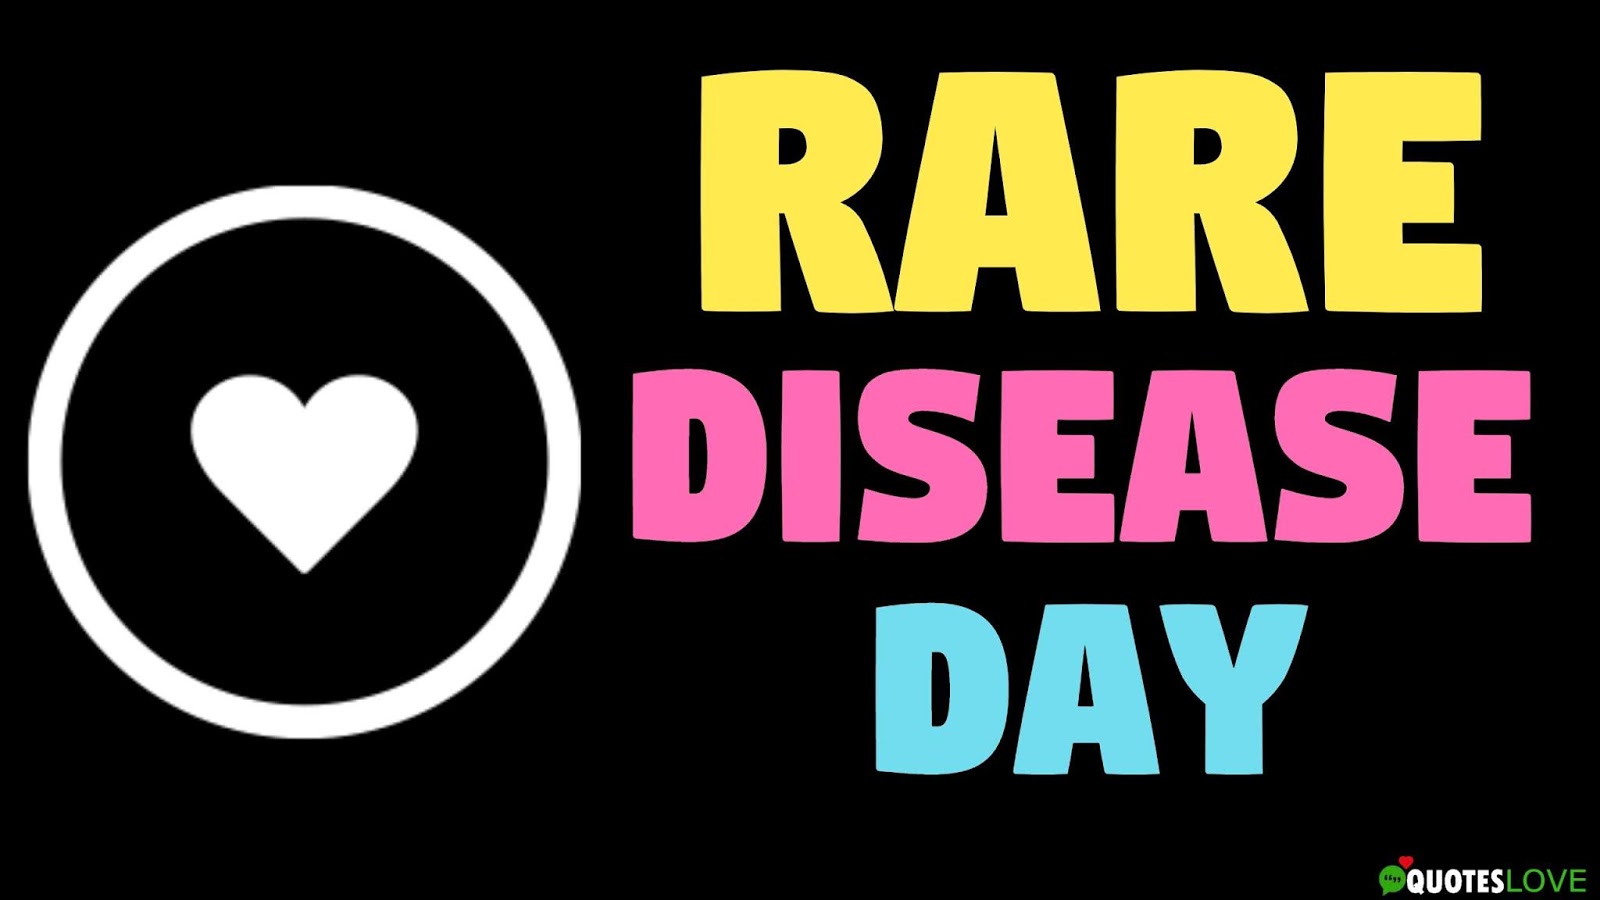 Rare Disease Day Quotes, Wishes, Messages, Images, Poster, Logo, Theme